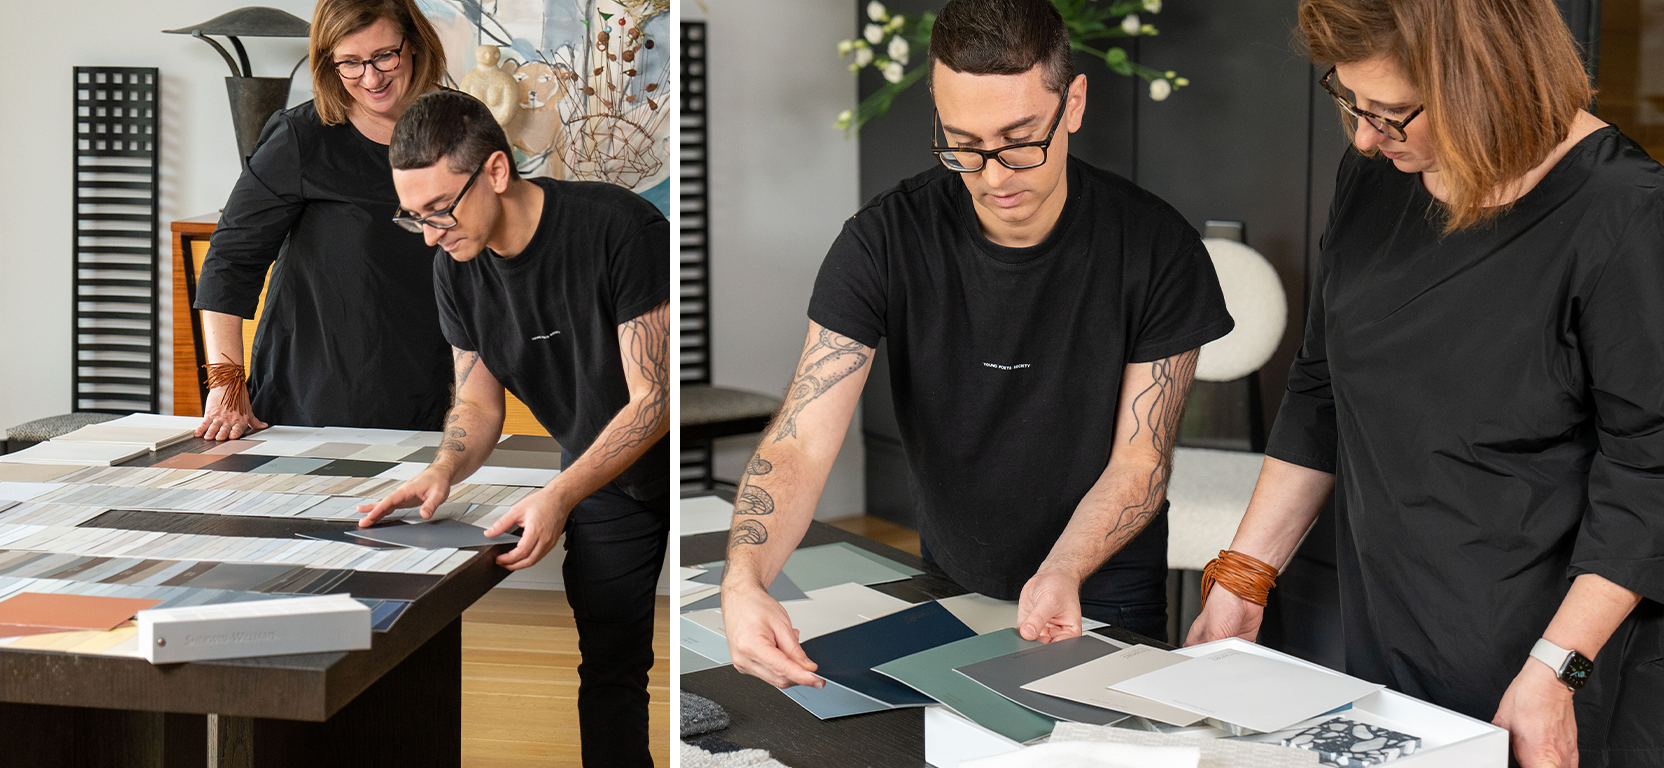 Sue Wadden and Christian Siriano bent over a large wooden table scattered with Sherwin-Williams paint samples, choosing colors for the new collection.